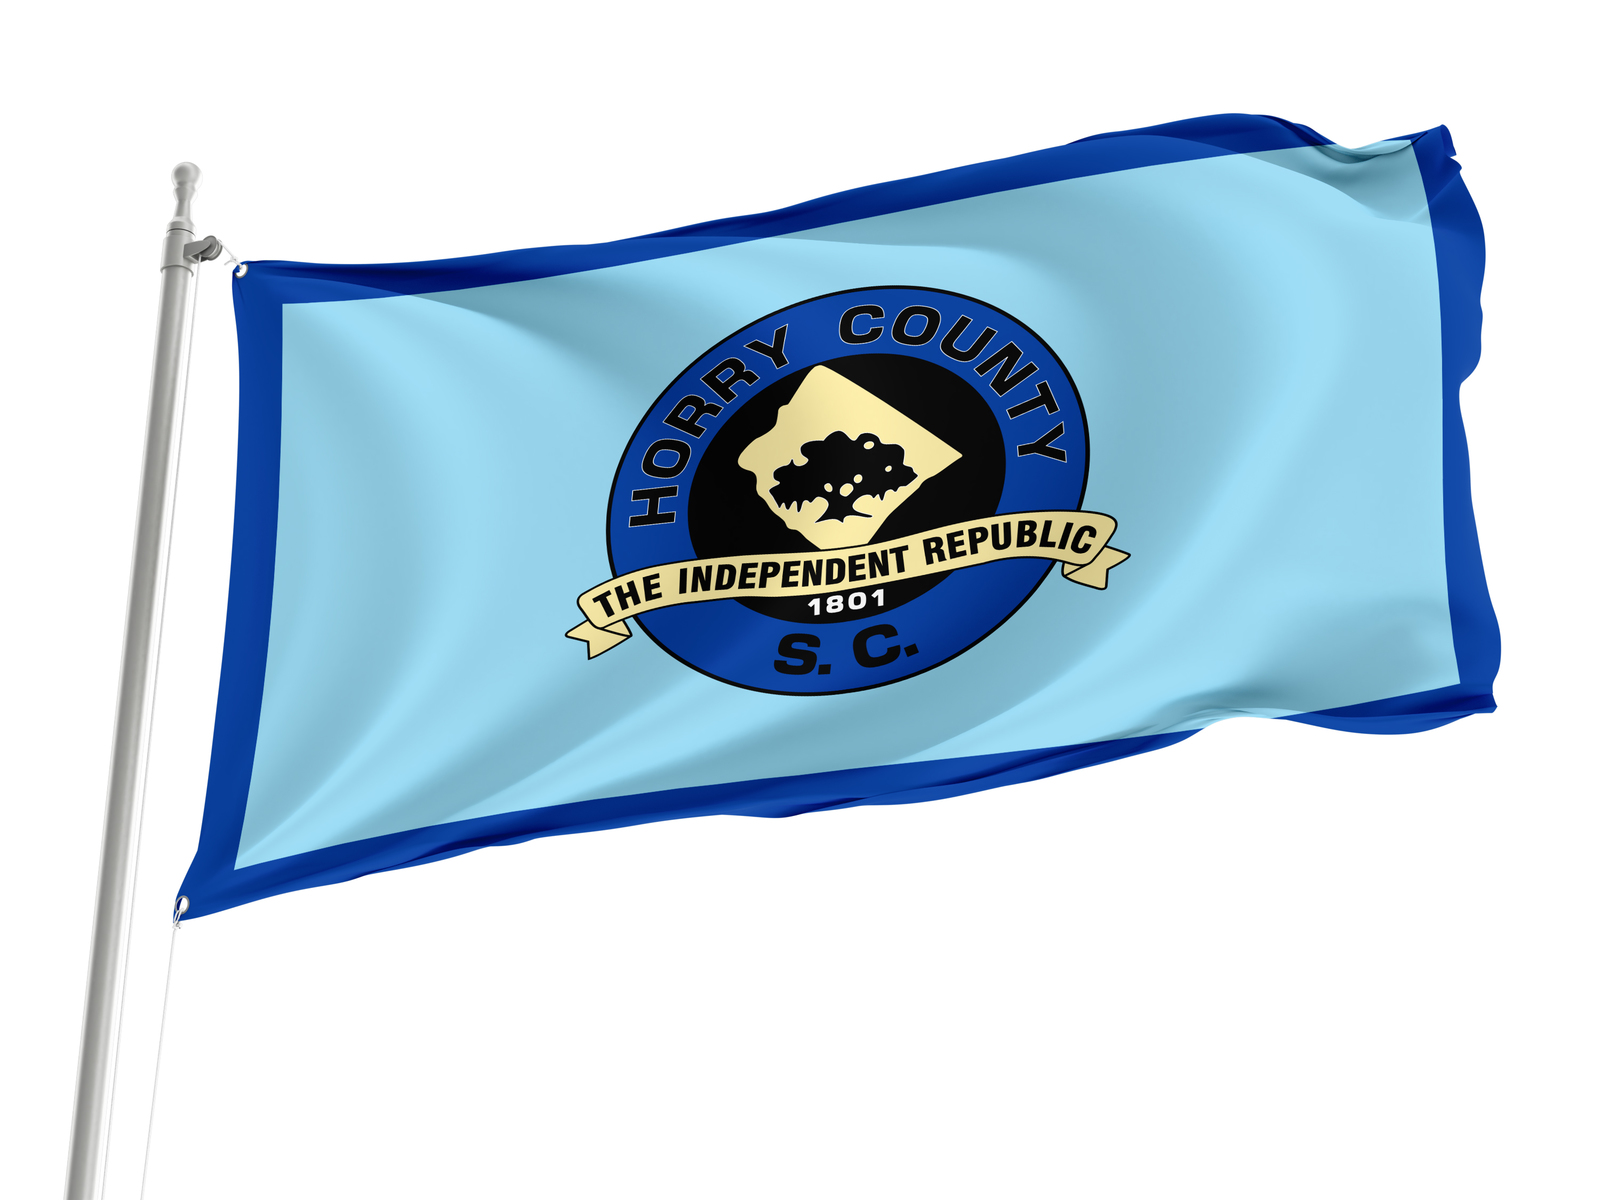 Primary image for Horry County, South Carolina Flag,Size -3x5Ft / 90x150cm, Garden flags